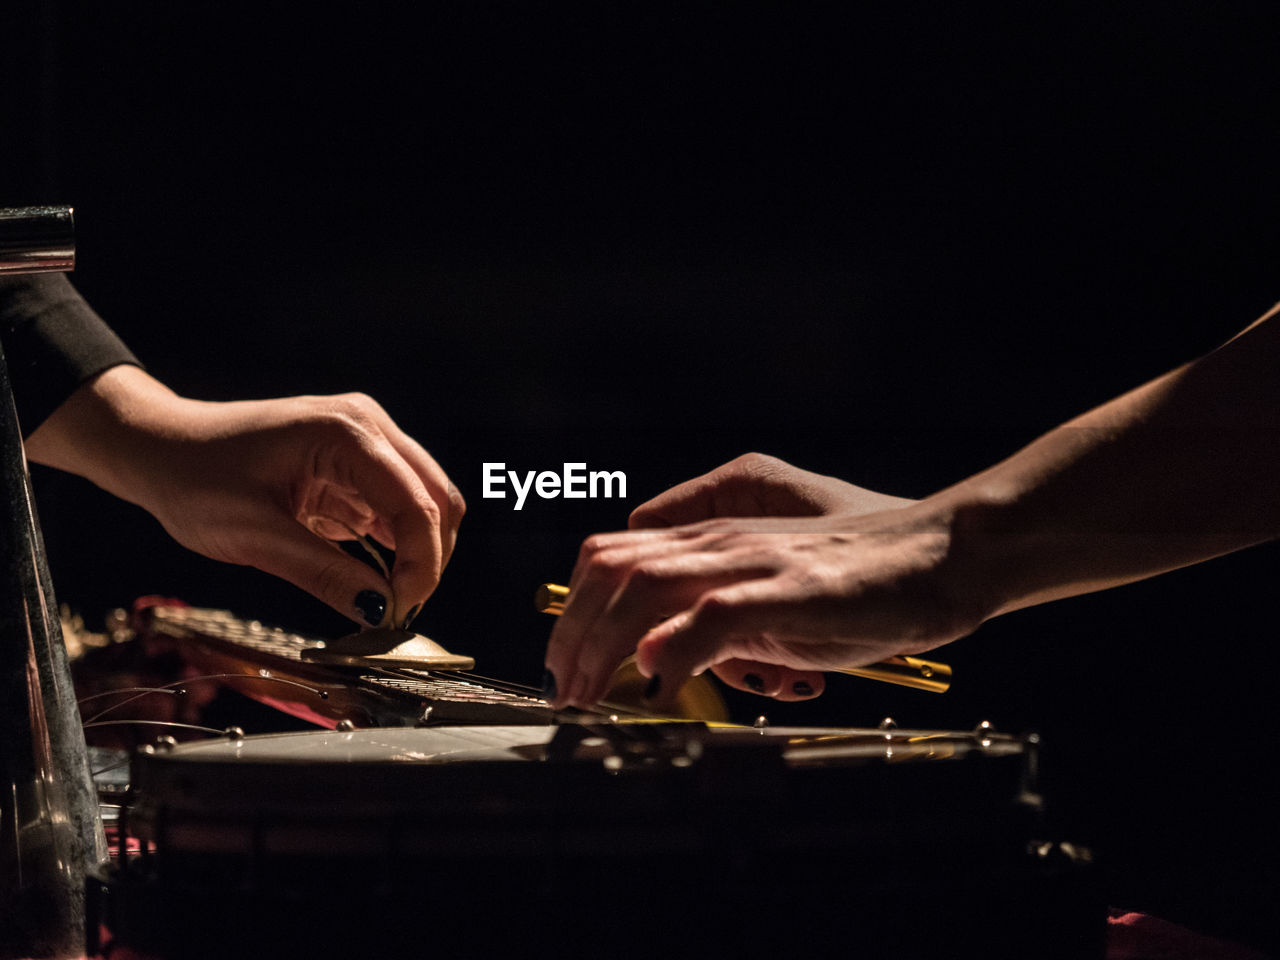 Cropped hands playing music against black background